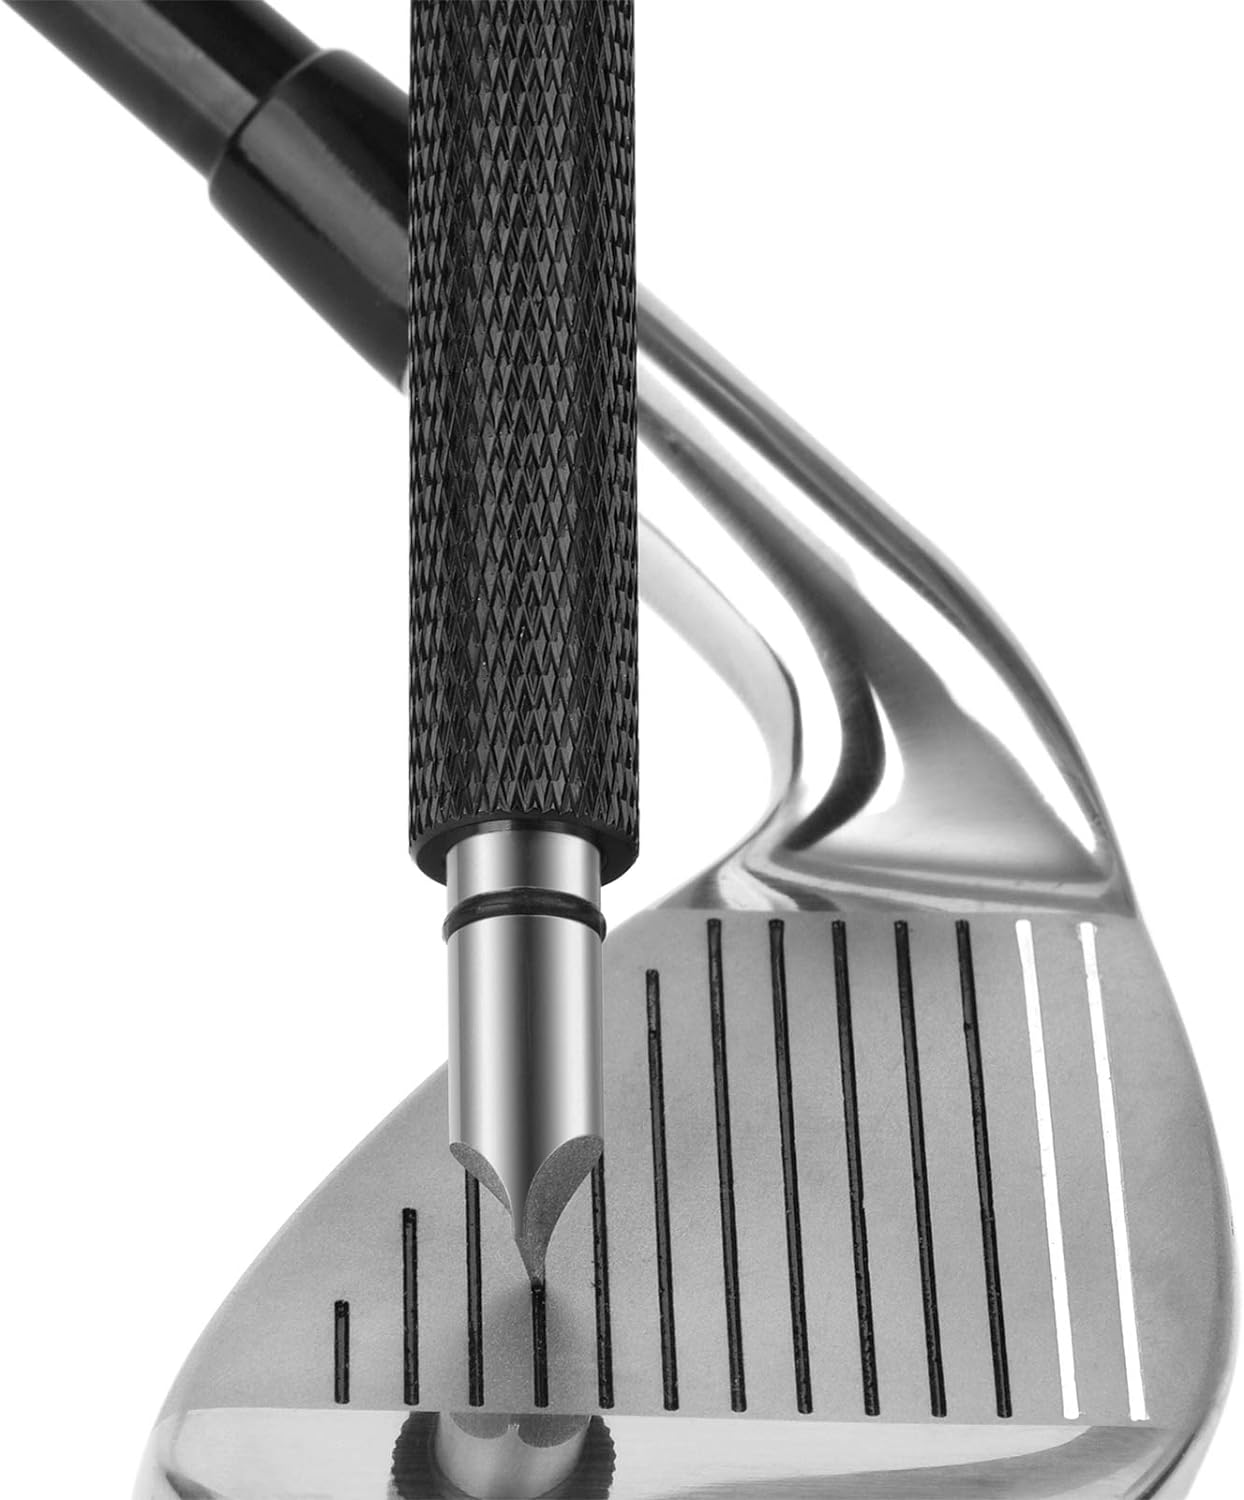 Bulex Golf Club Groove Sharpener, Re-Grooving Tool and Cleaner for Wedges & Irons $5.99 Free Ship w/Prime or on orders $35+